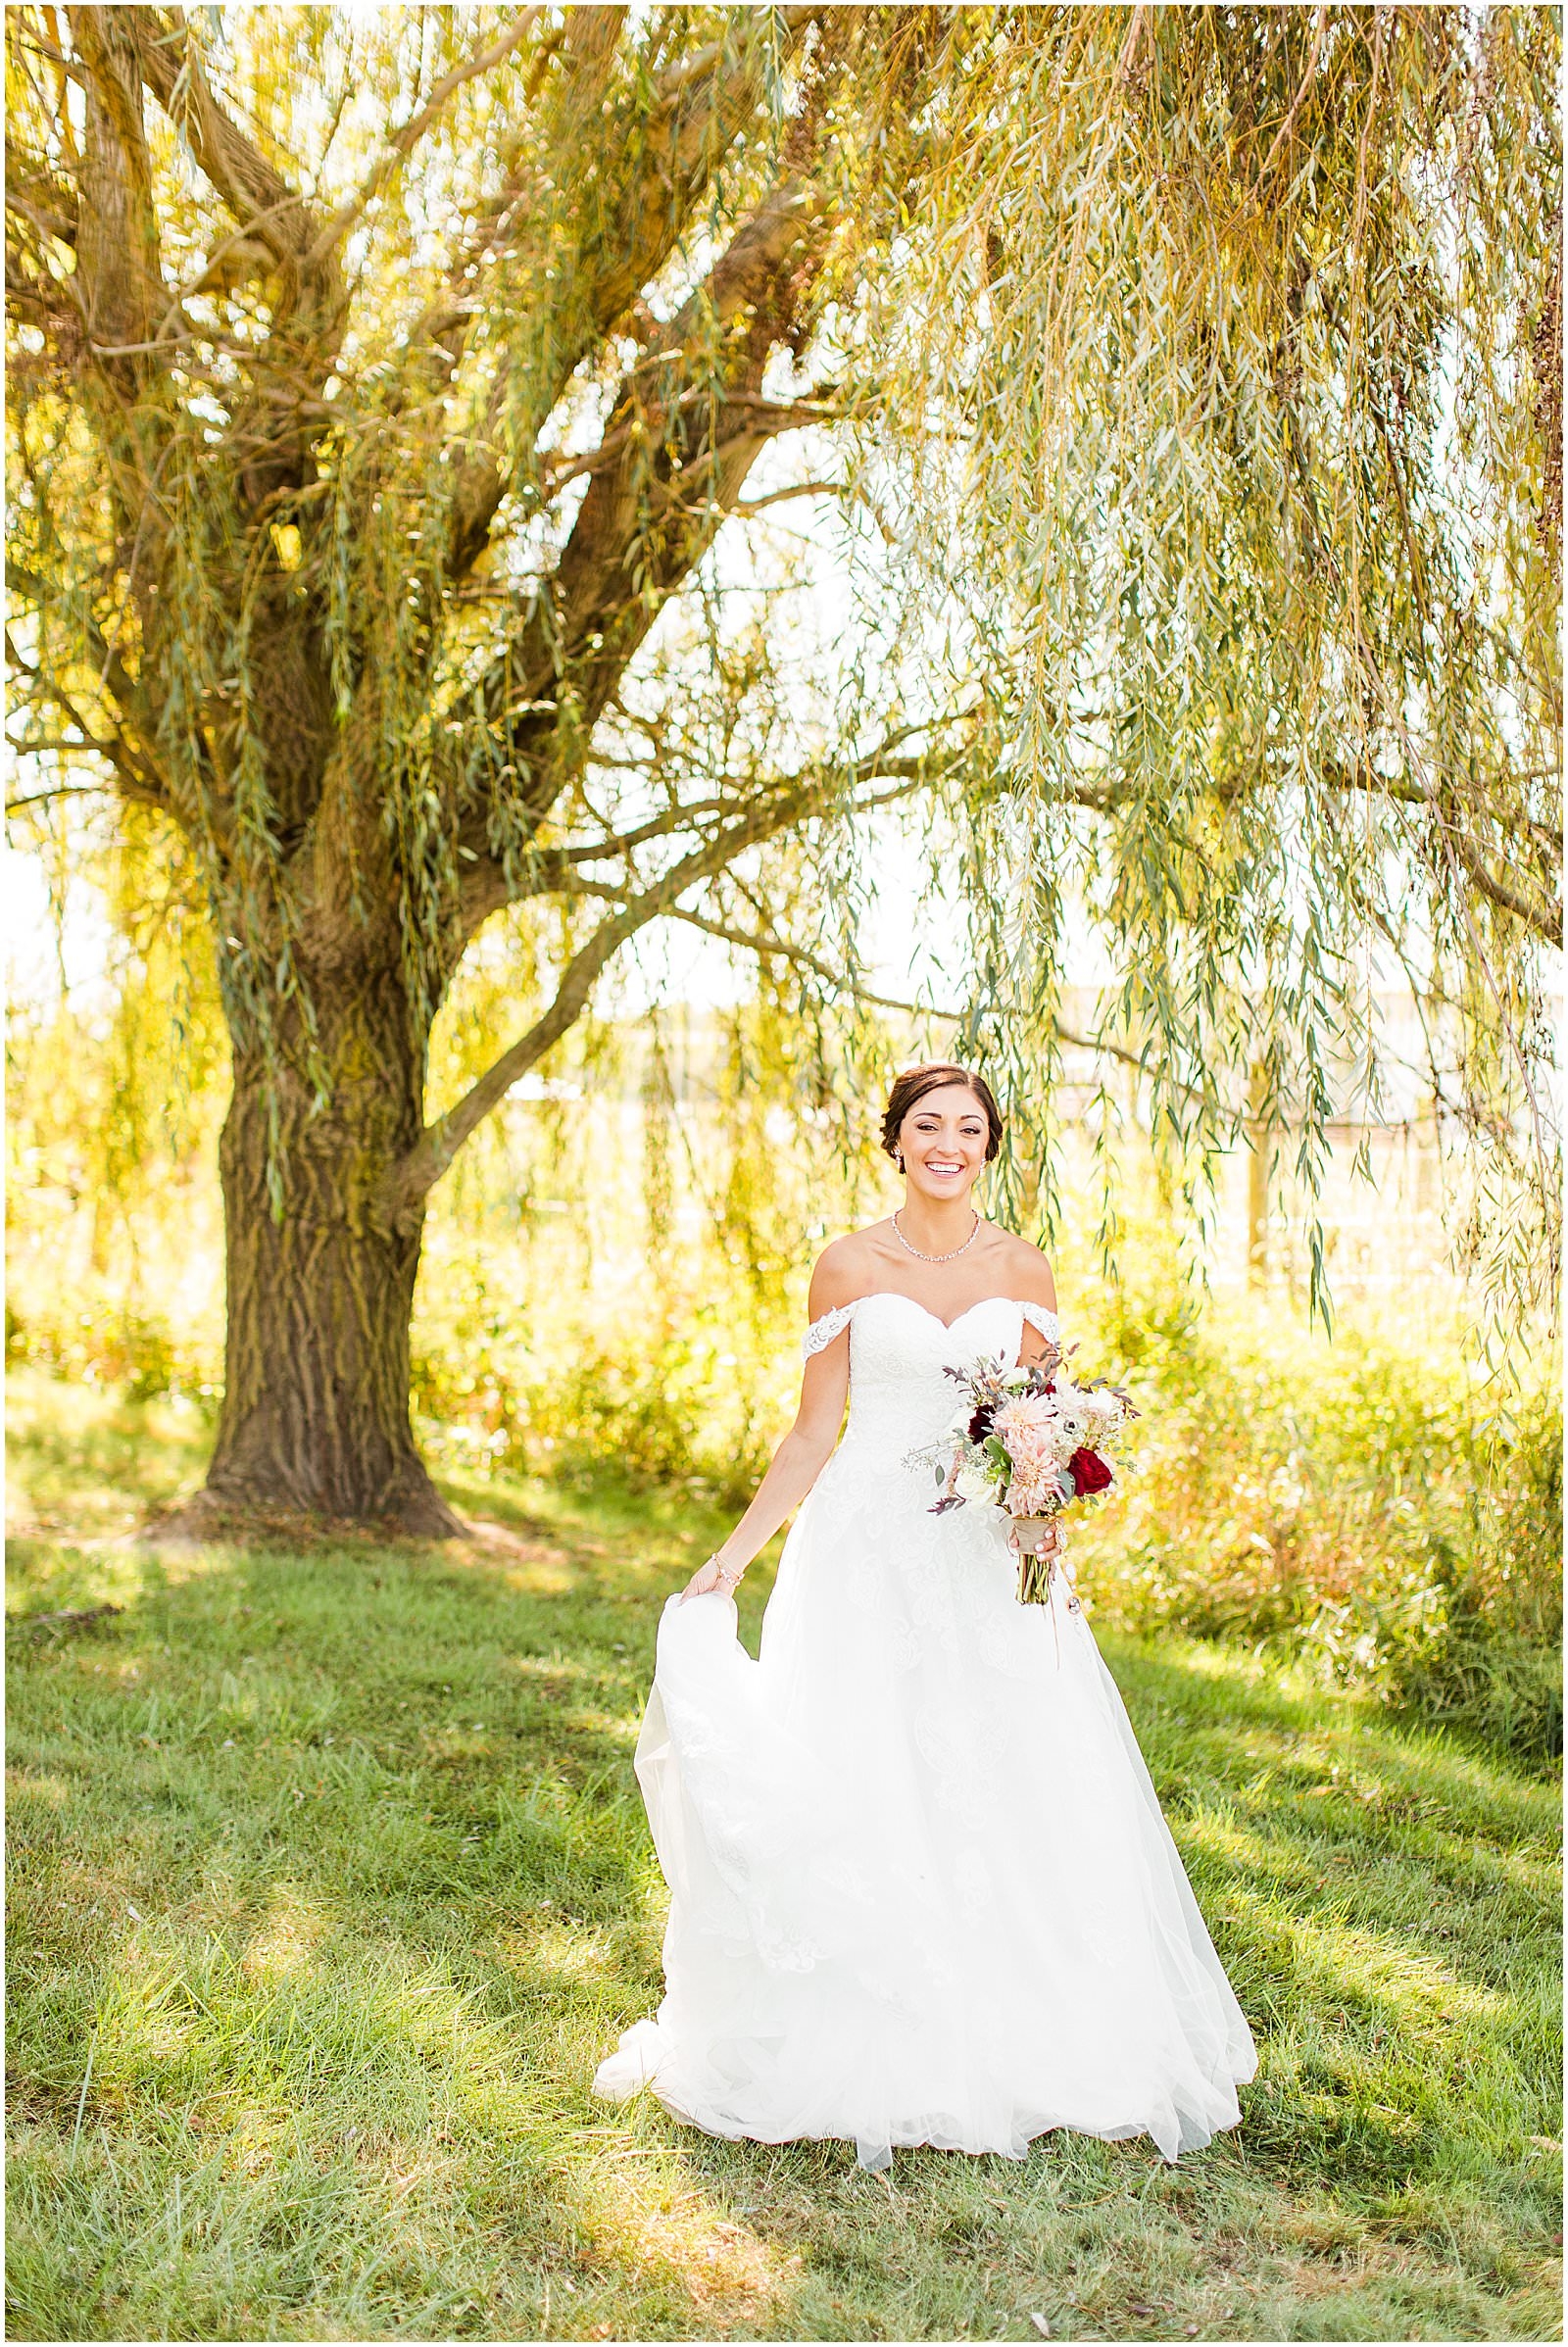 A Stunning Fall Wedding in Indianapolis, IN |. Sally and Andrew | Bret and Brandie Photography 0092.jpg